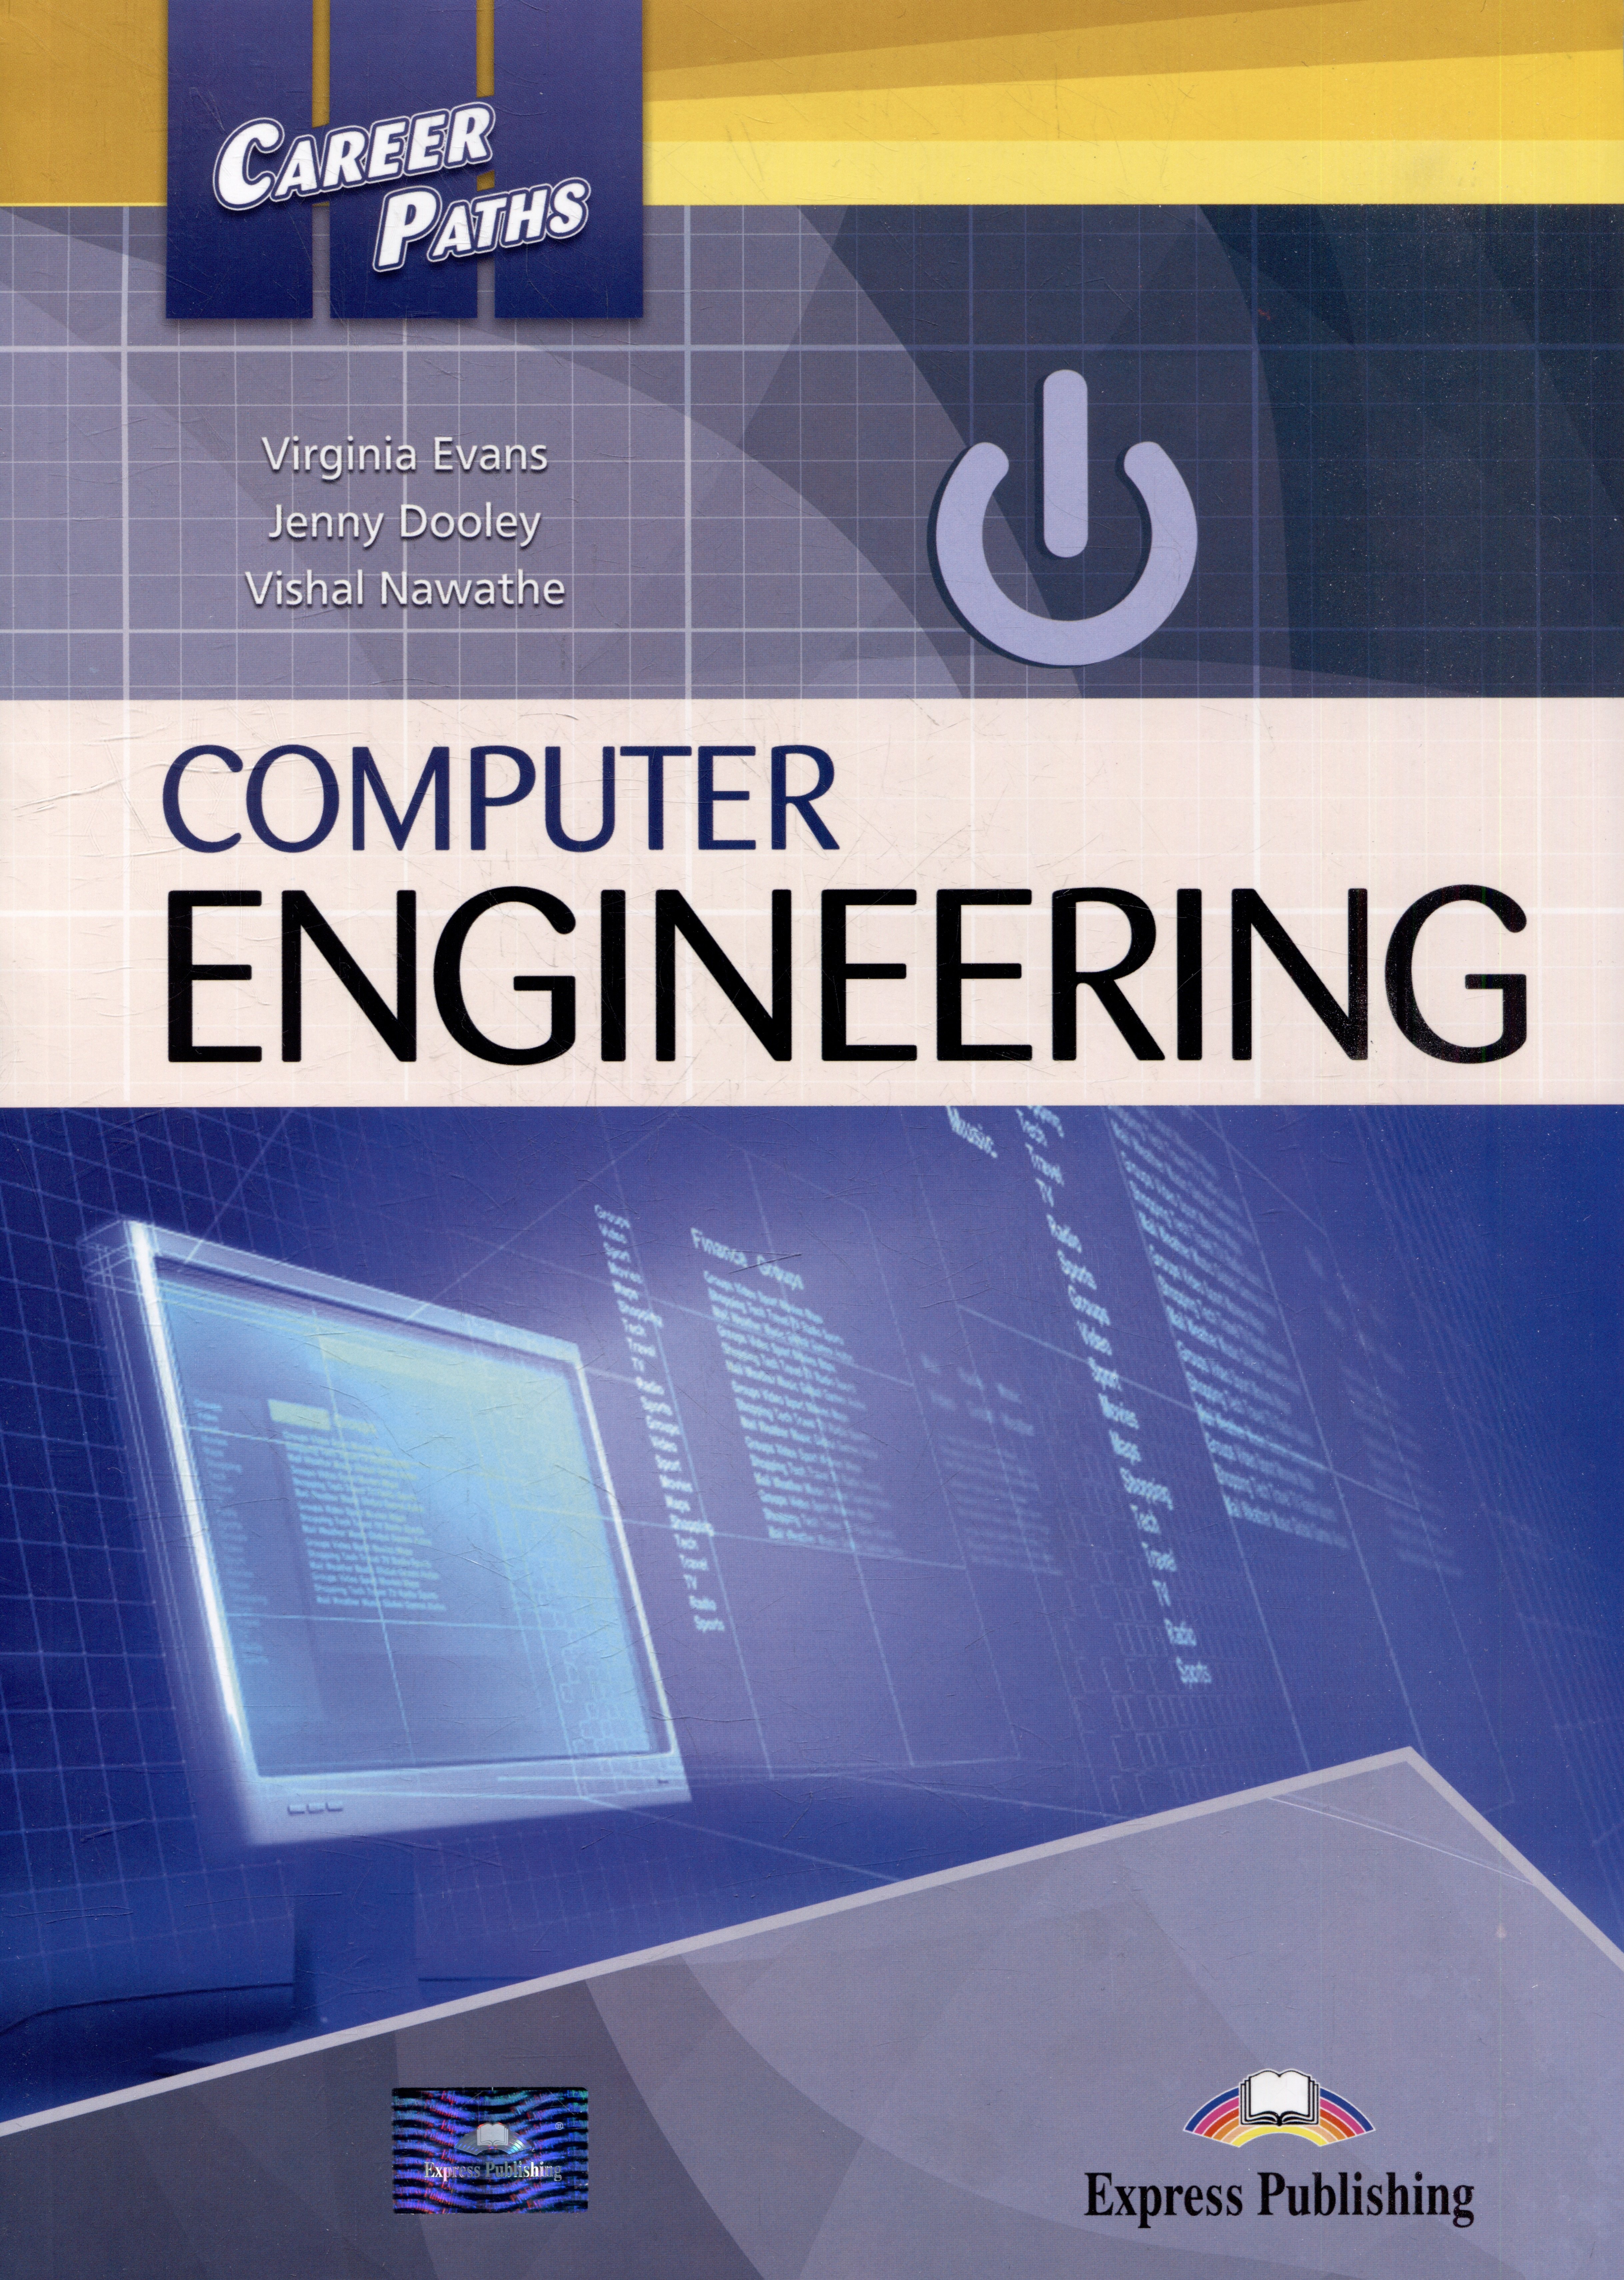 Career Paths: Computer Engineering. Students Book with Digibook Application (Includes Audio & Video)